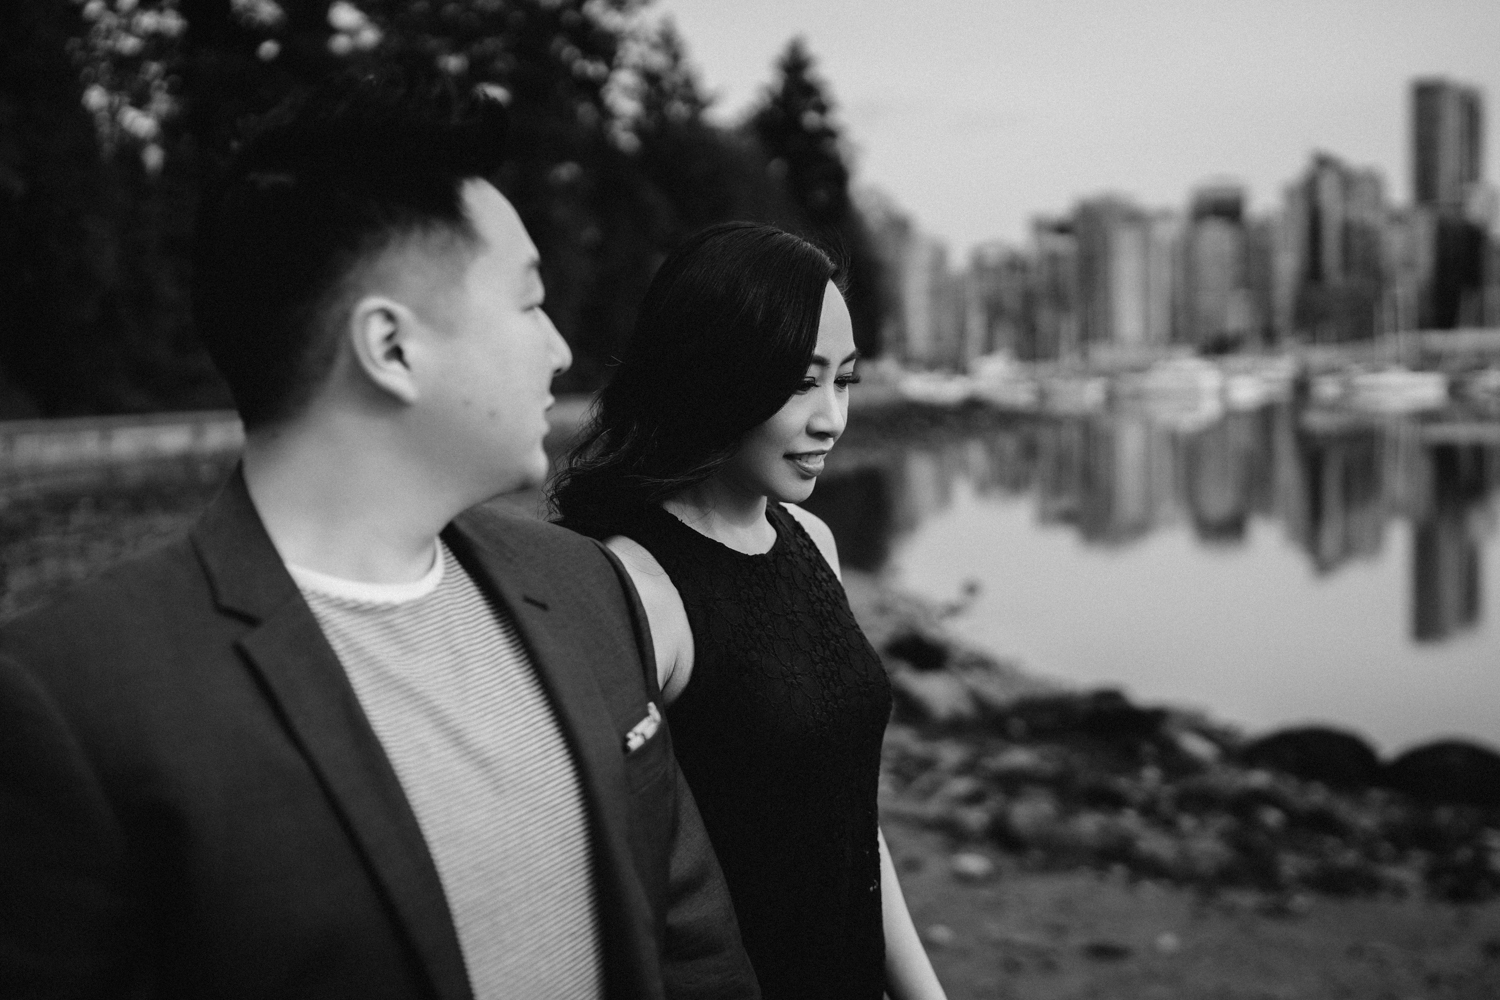 vancouver stanley park engagement photography spring cherry blossoms